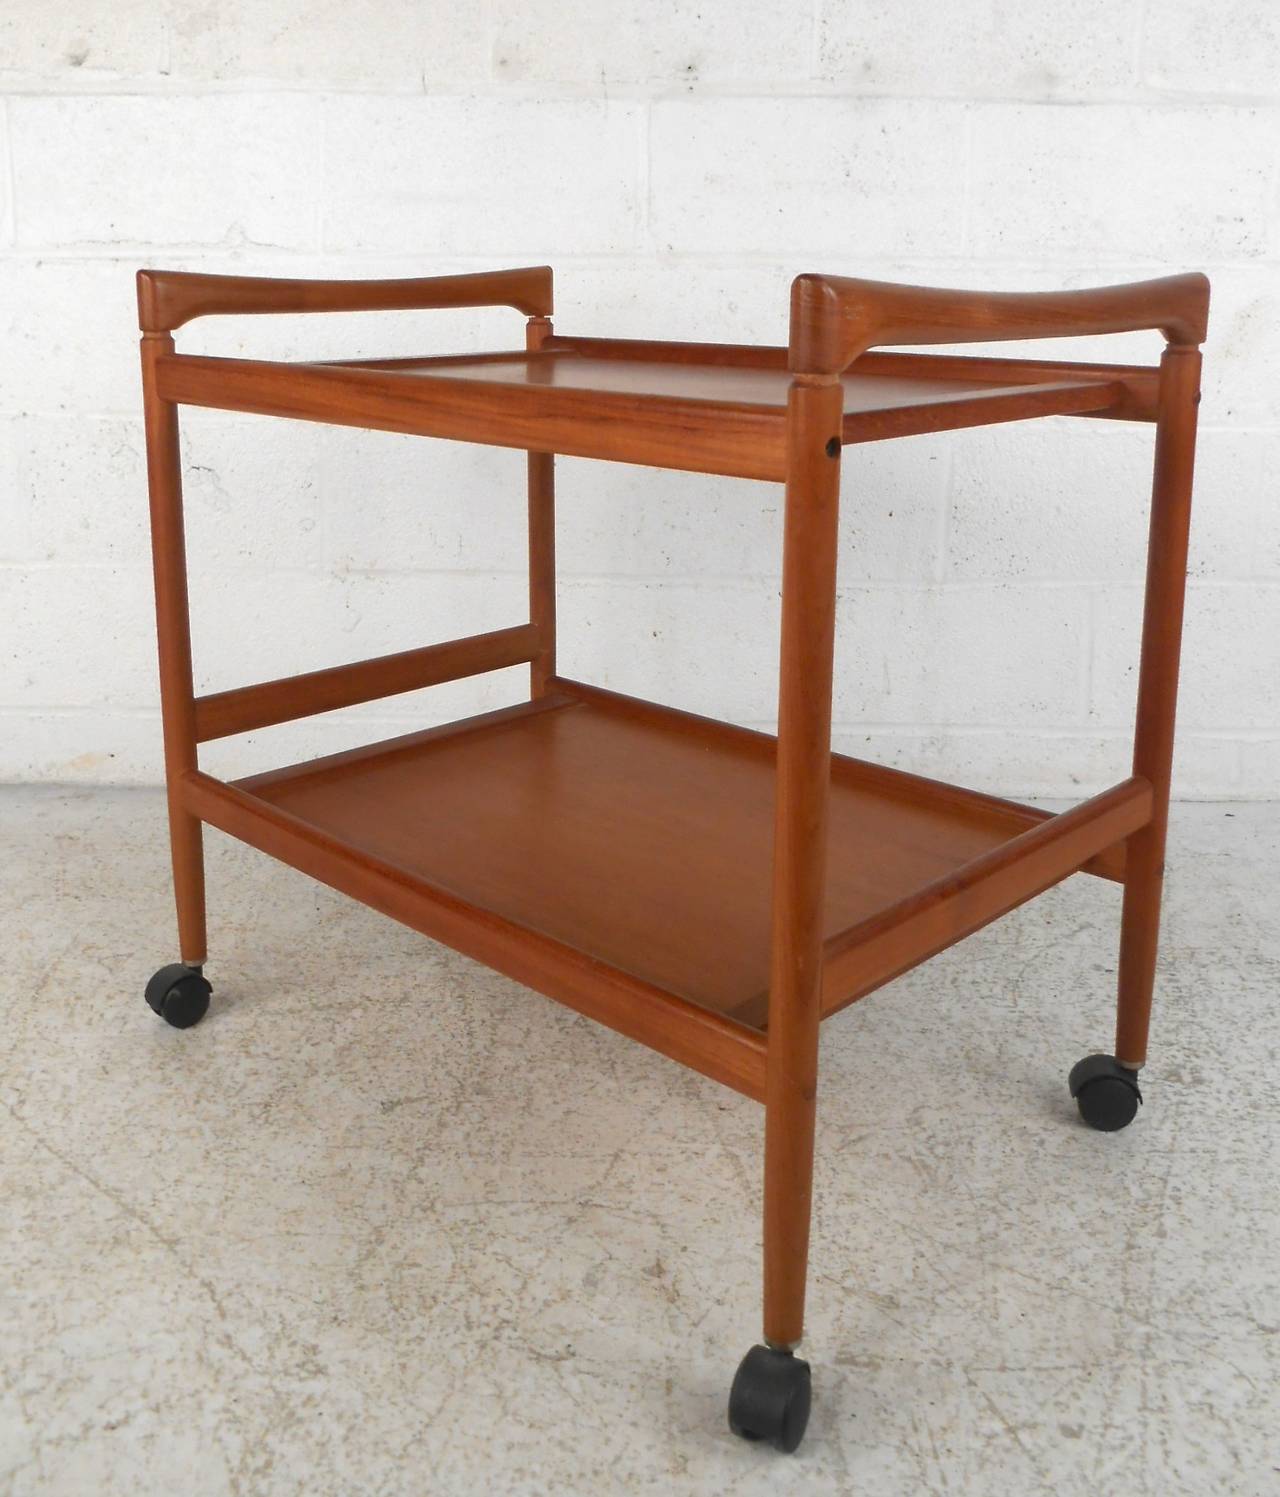 Vintage rolling tea/bar cart, made of sculpted teak wood with two levels, set on 360 degree wheels. Smooth formed handles, great Danish style. Makes for a great movable console or side table.

(Please confirm item location - NY or NJ - with